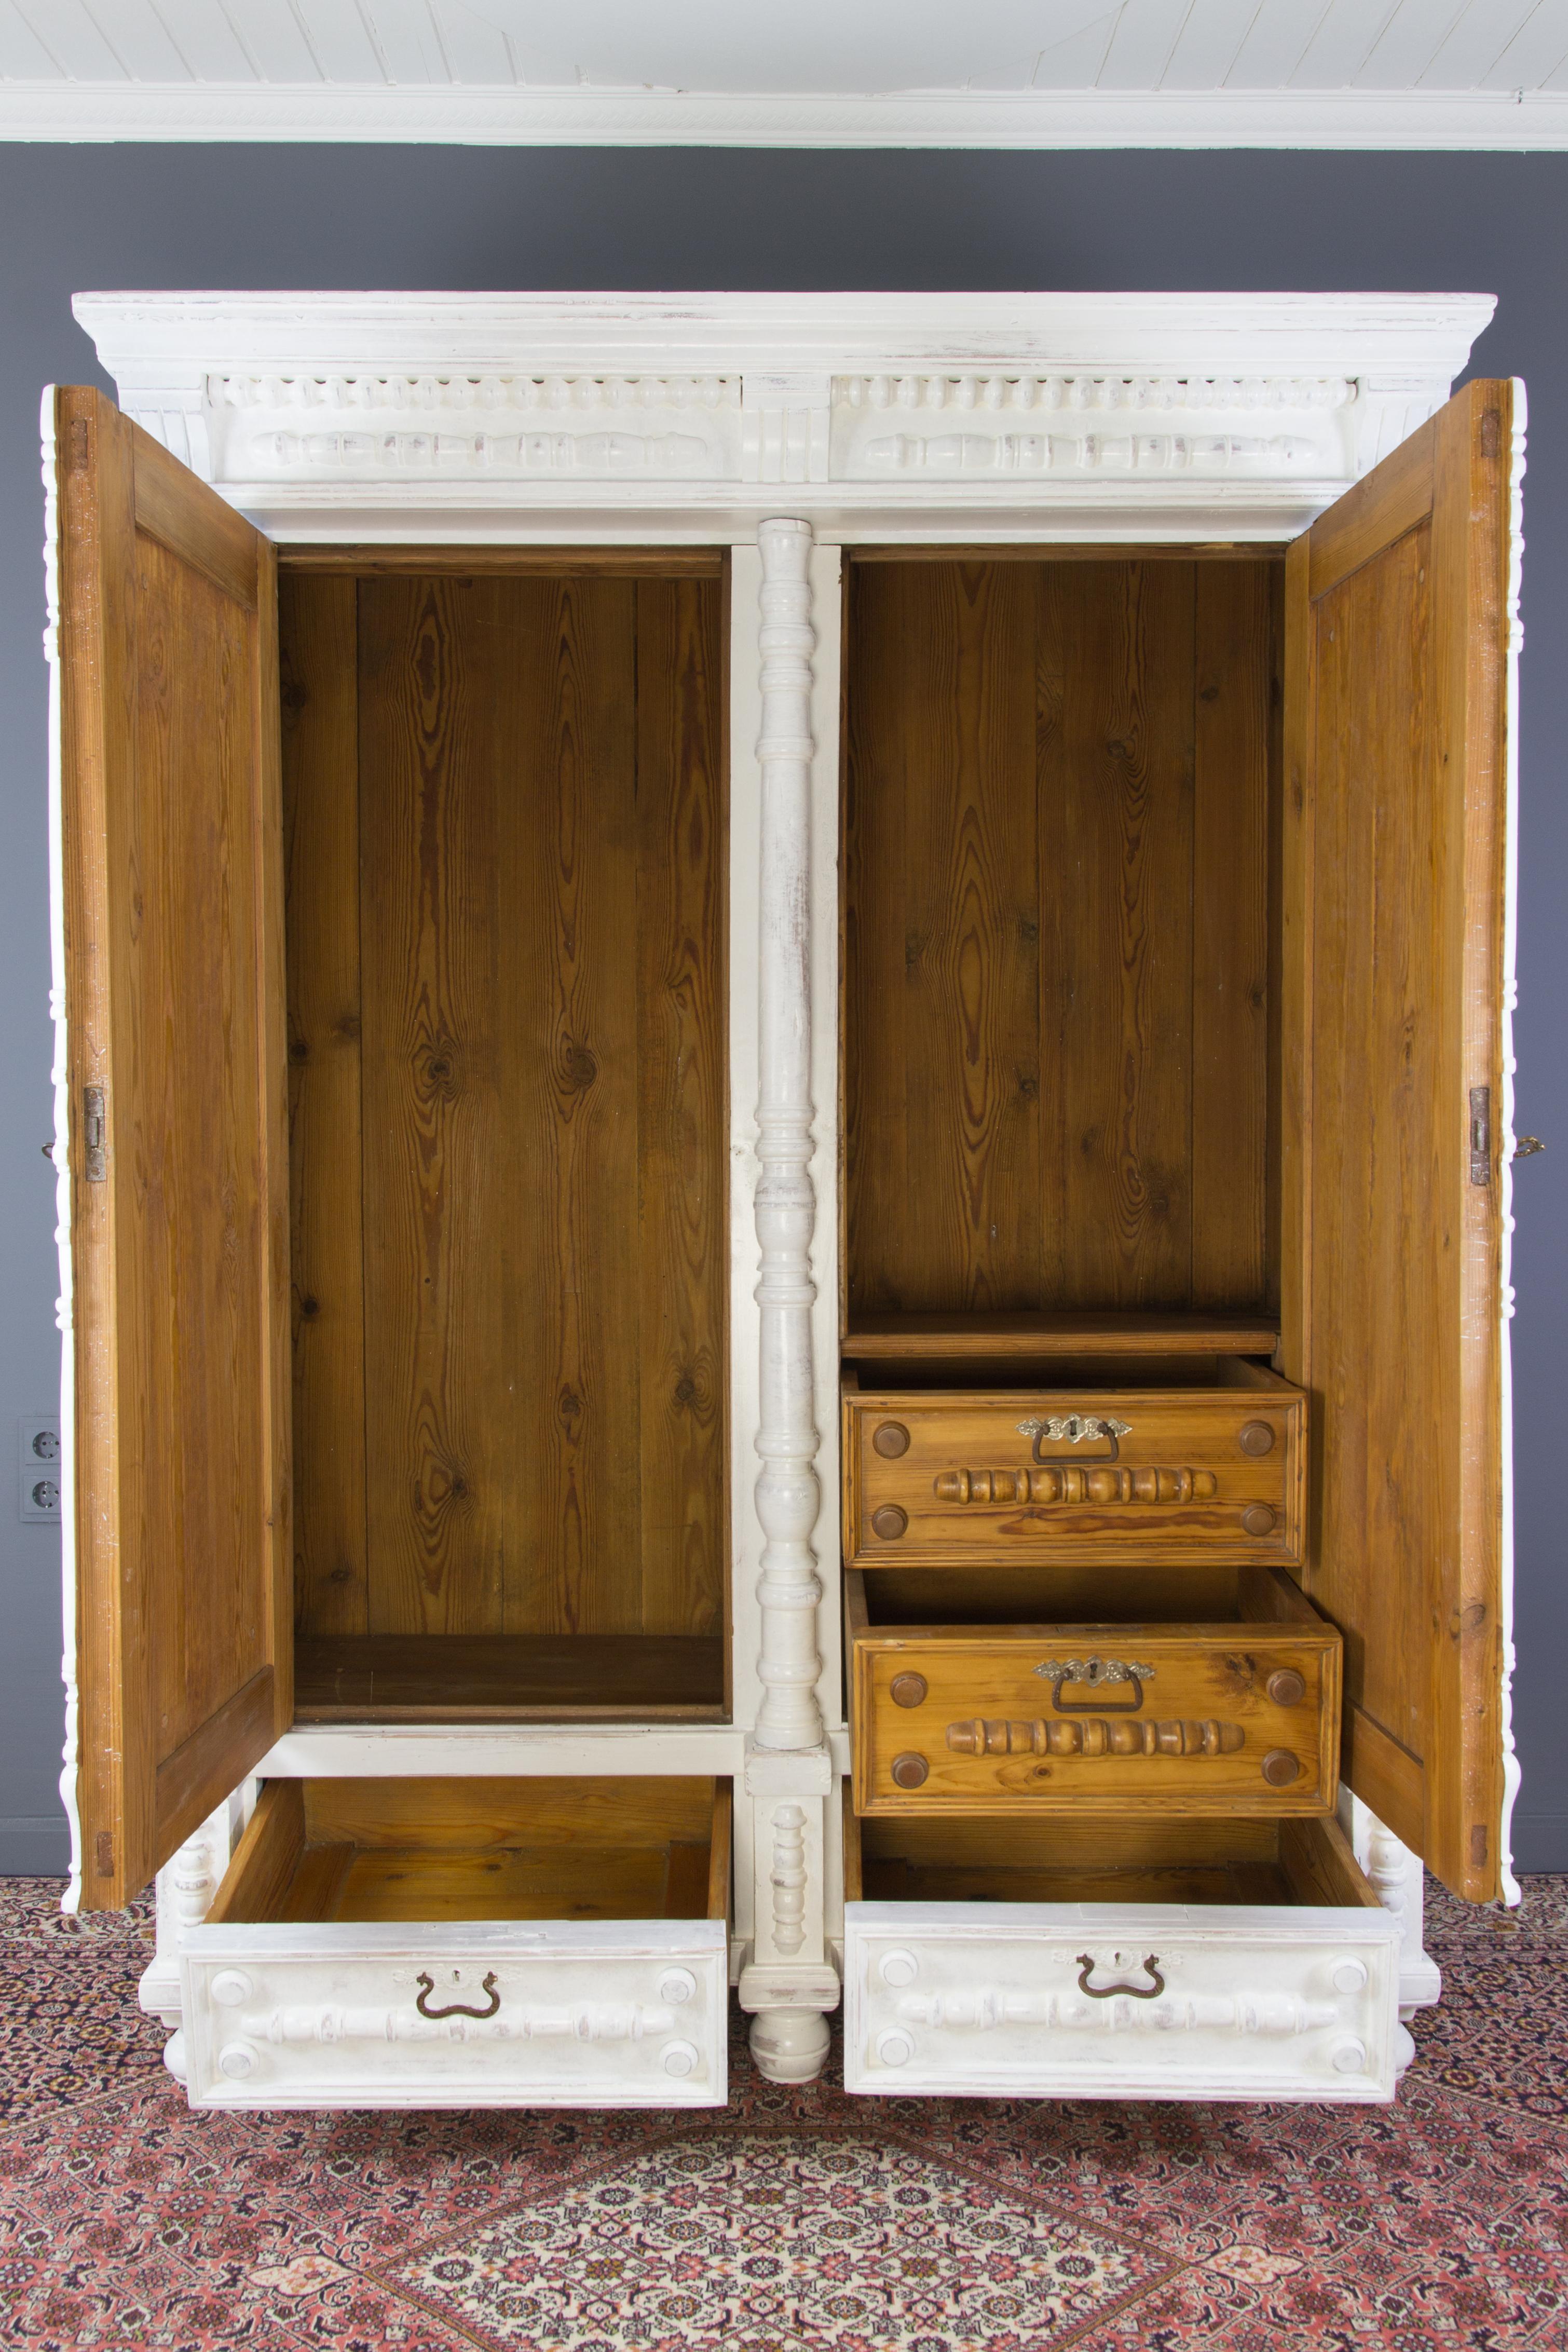 This beautiful and massive early 20th-century Baltic armoire features paneled doors and two pull-out drawers below, three massive turned column pilasters, and two half-columns on each door. The exterior front side has a whitewashed finish. Inside,